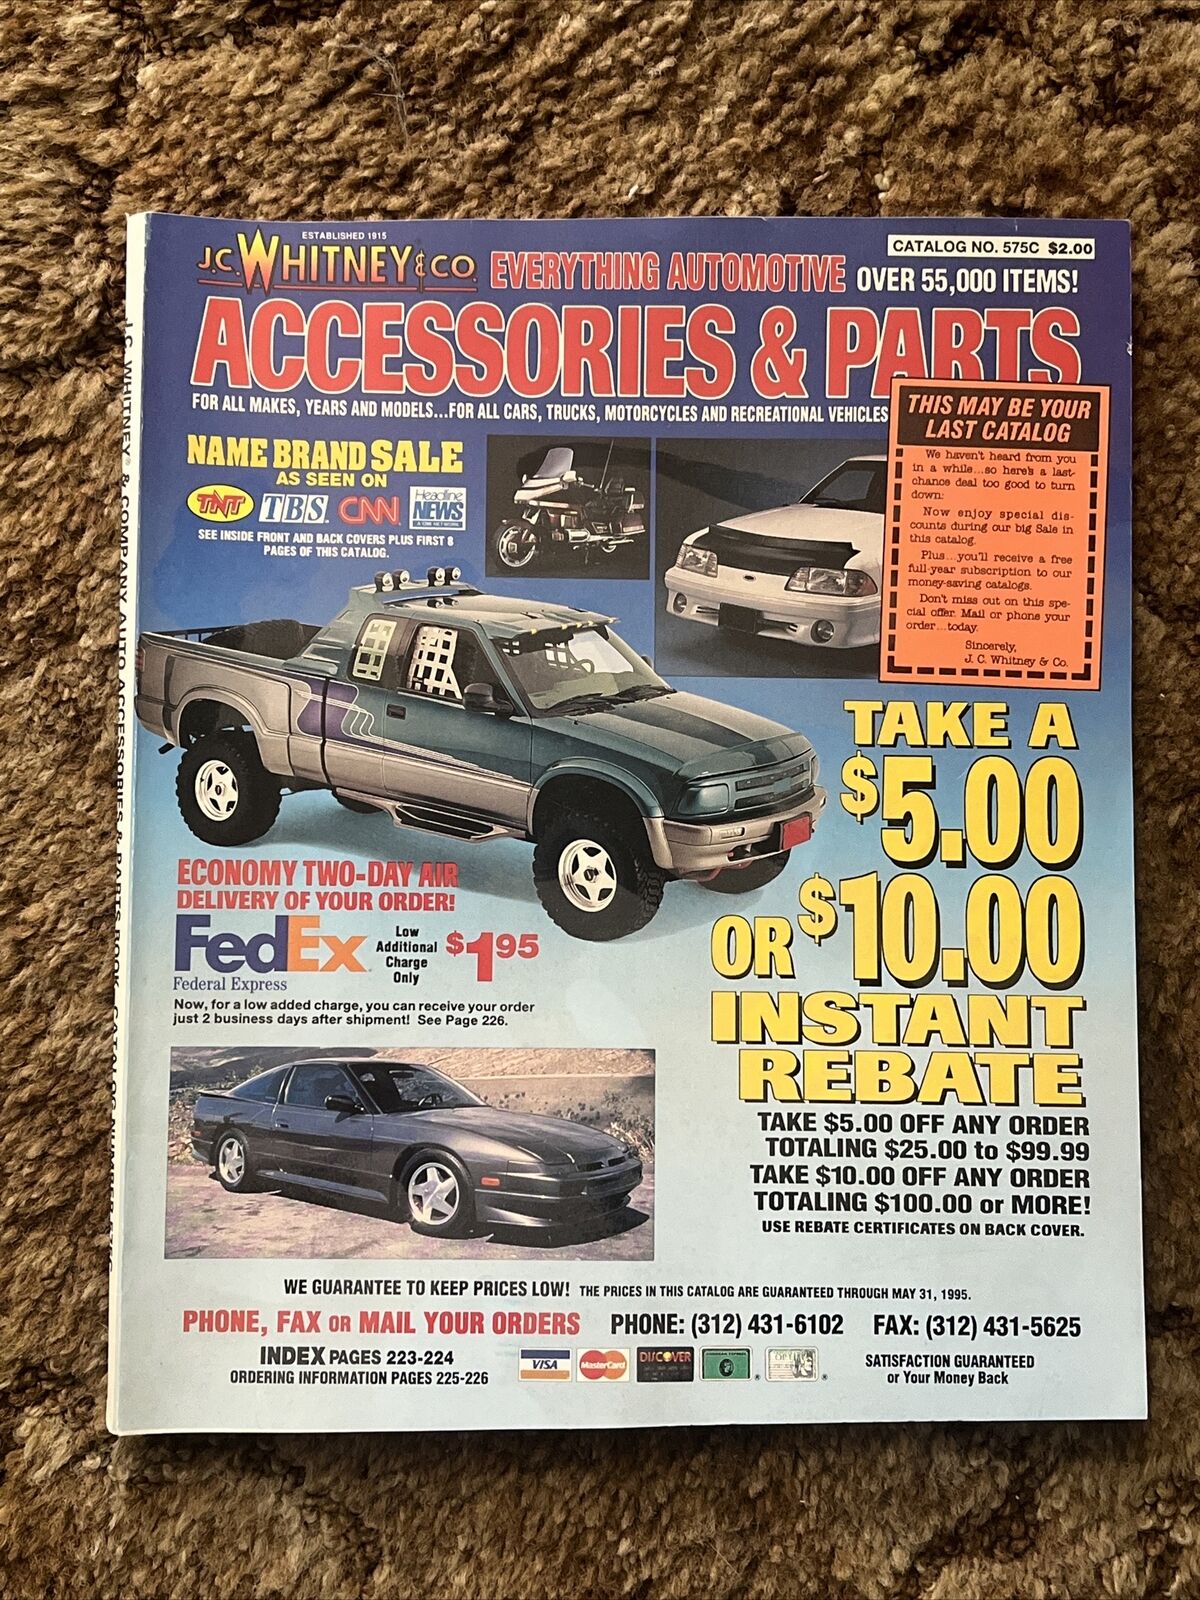 1995 JC WHITNEY EVERYTHING AUTOMOTIVE OVER 55000 ITEMS CATALOG PARTS ACCESSORIES